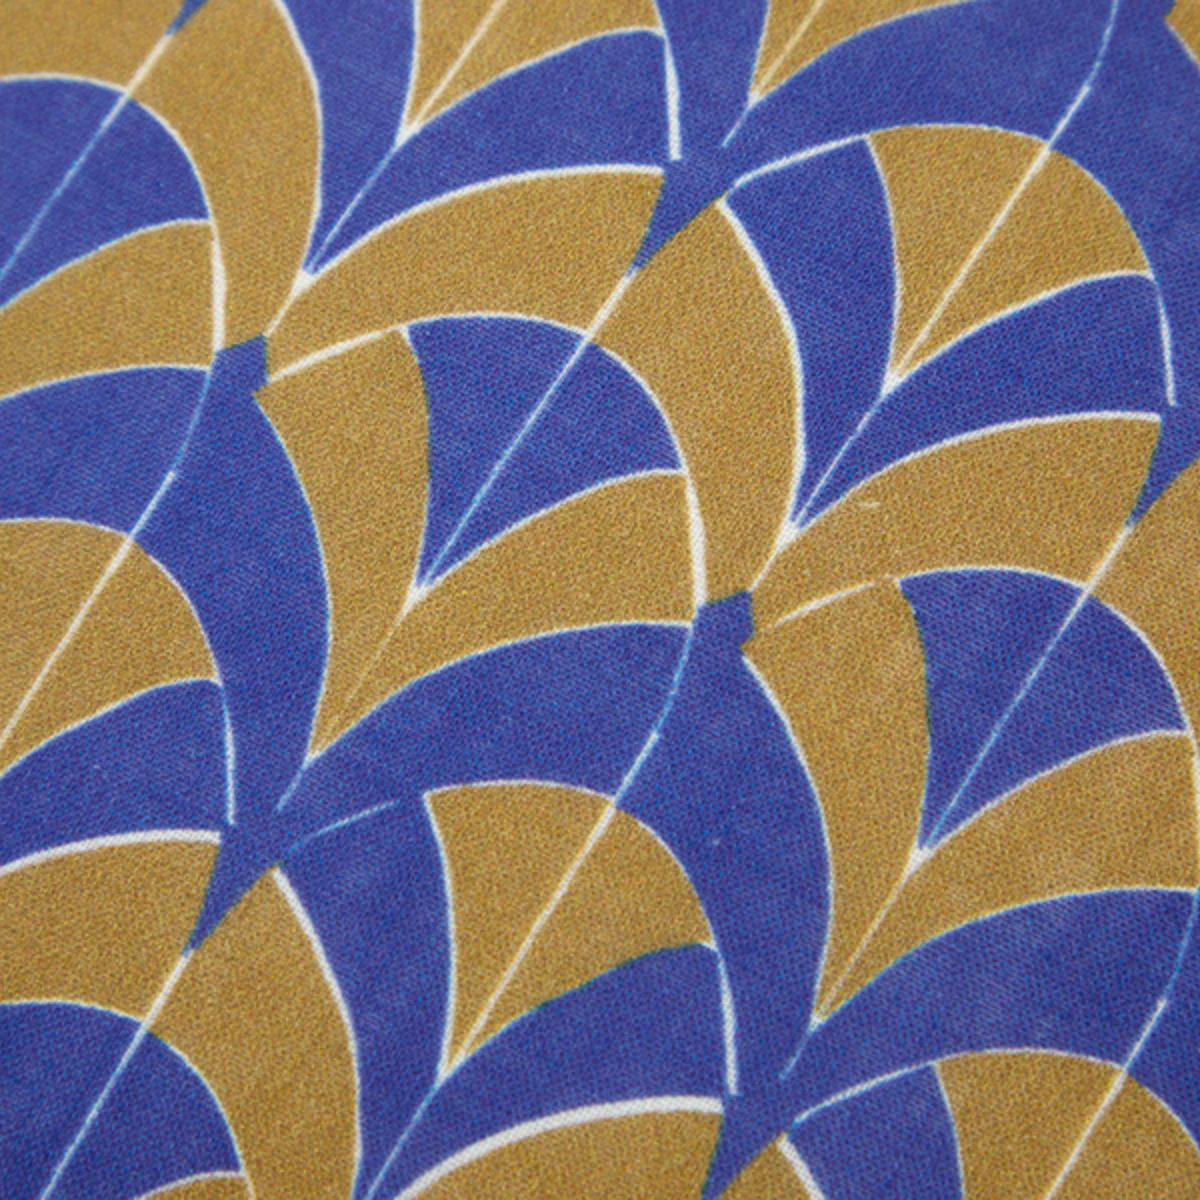 Detail of Yves Delorme Canopée Decorative Pillow